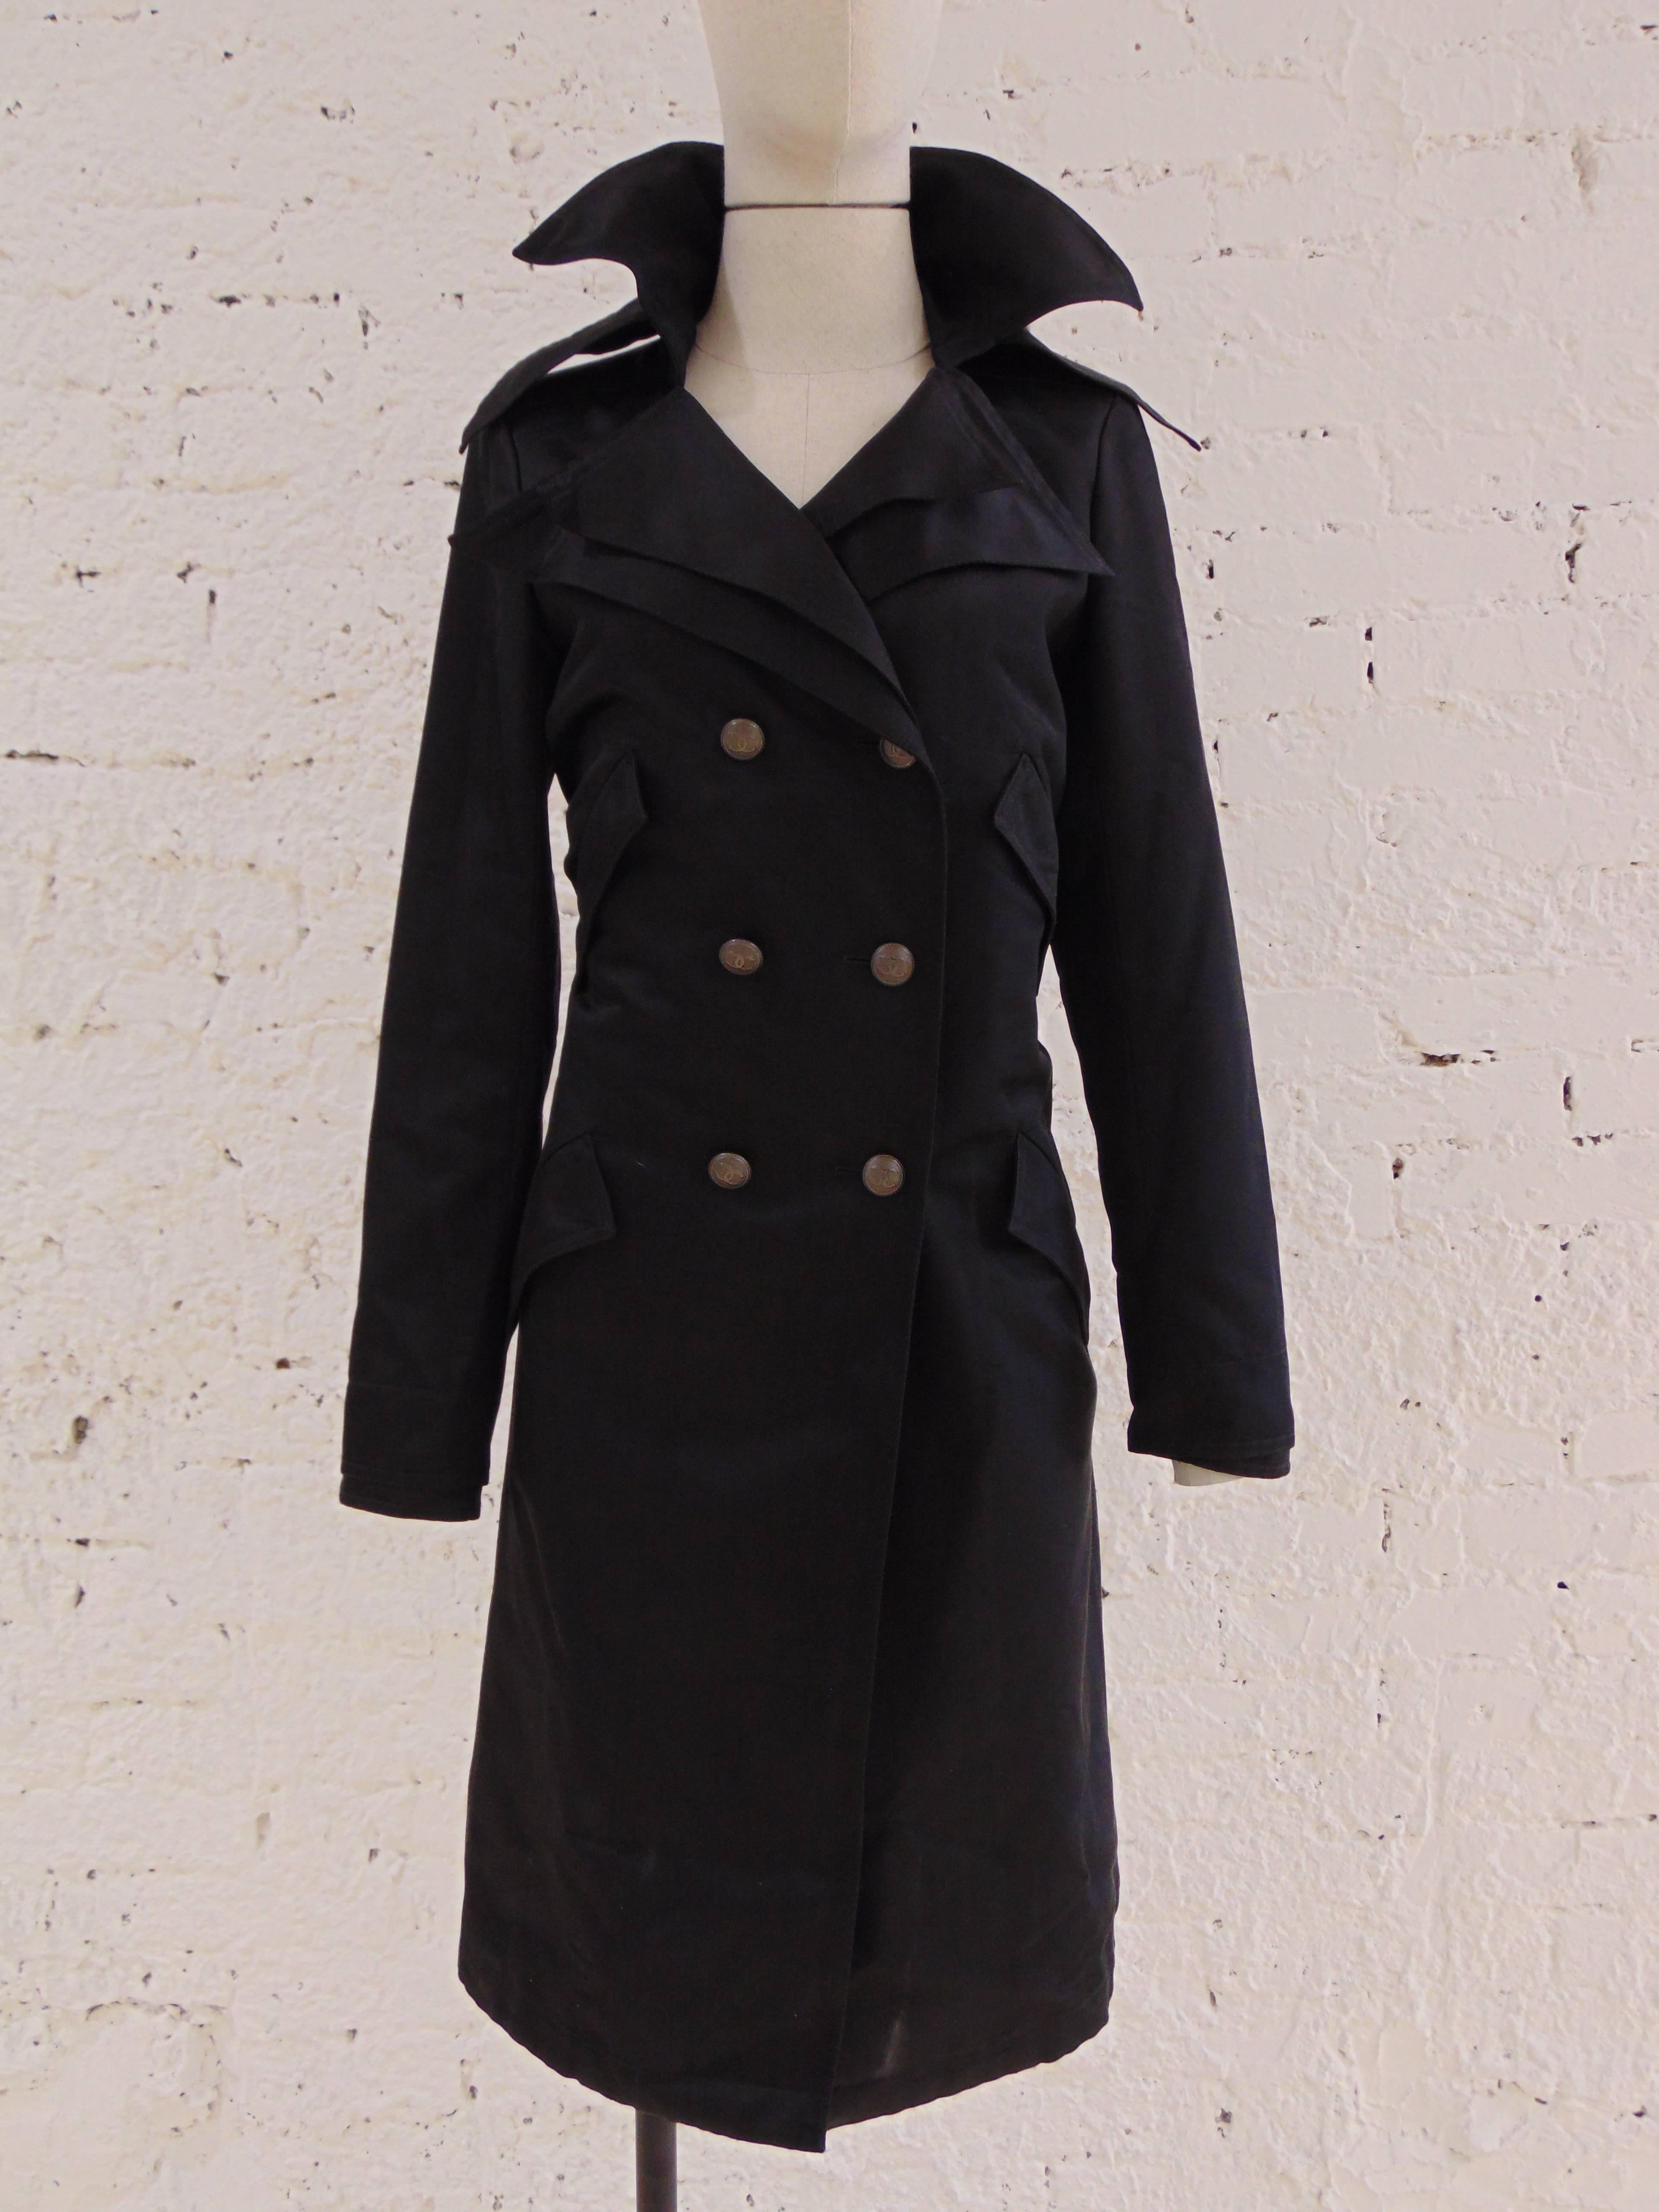 Chanel black coat

must have Chanel black coat totally made in france in size it 42